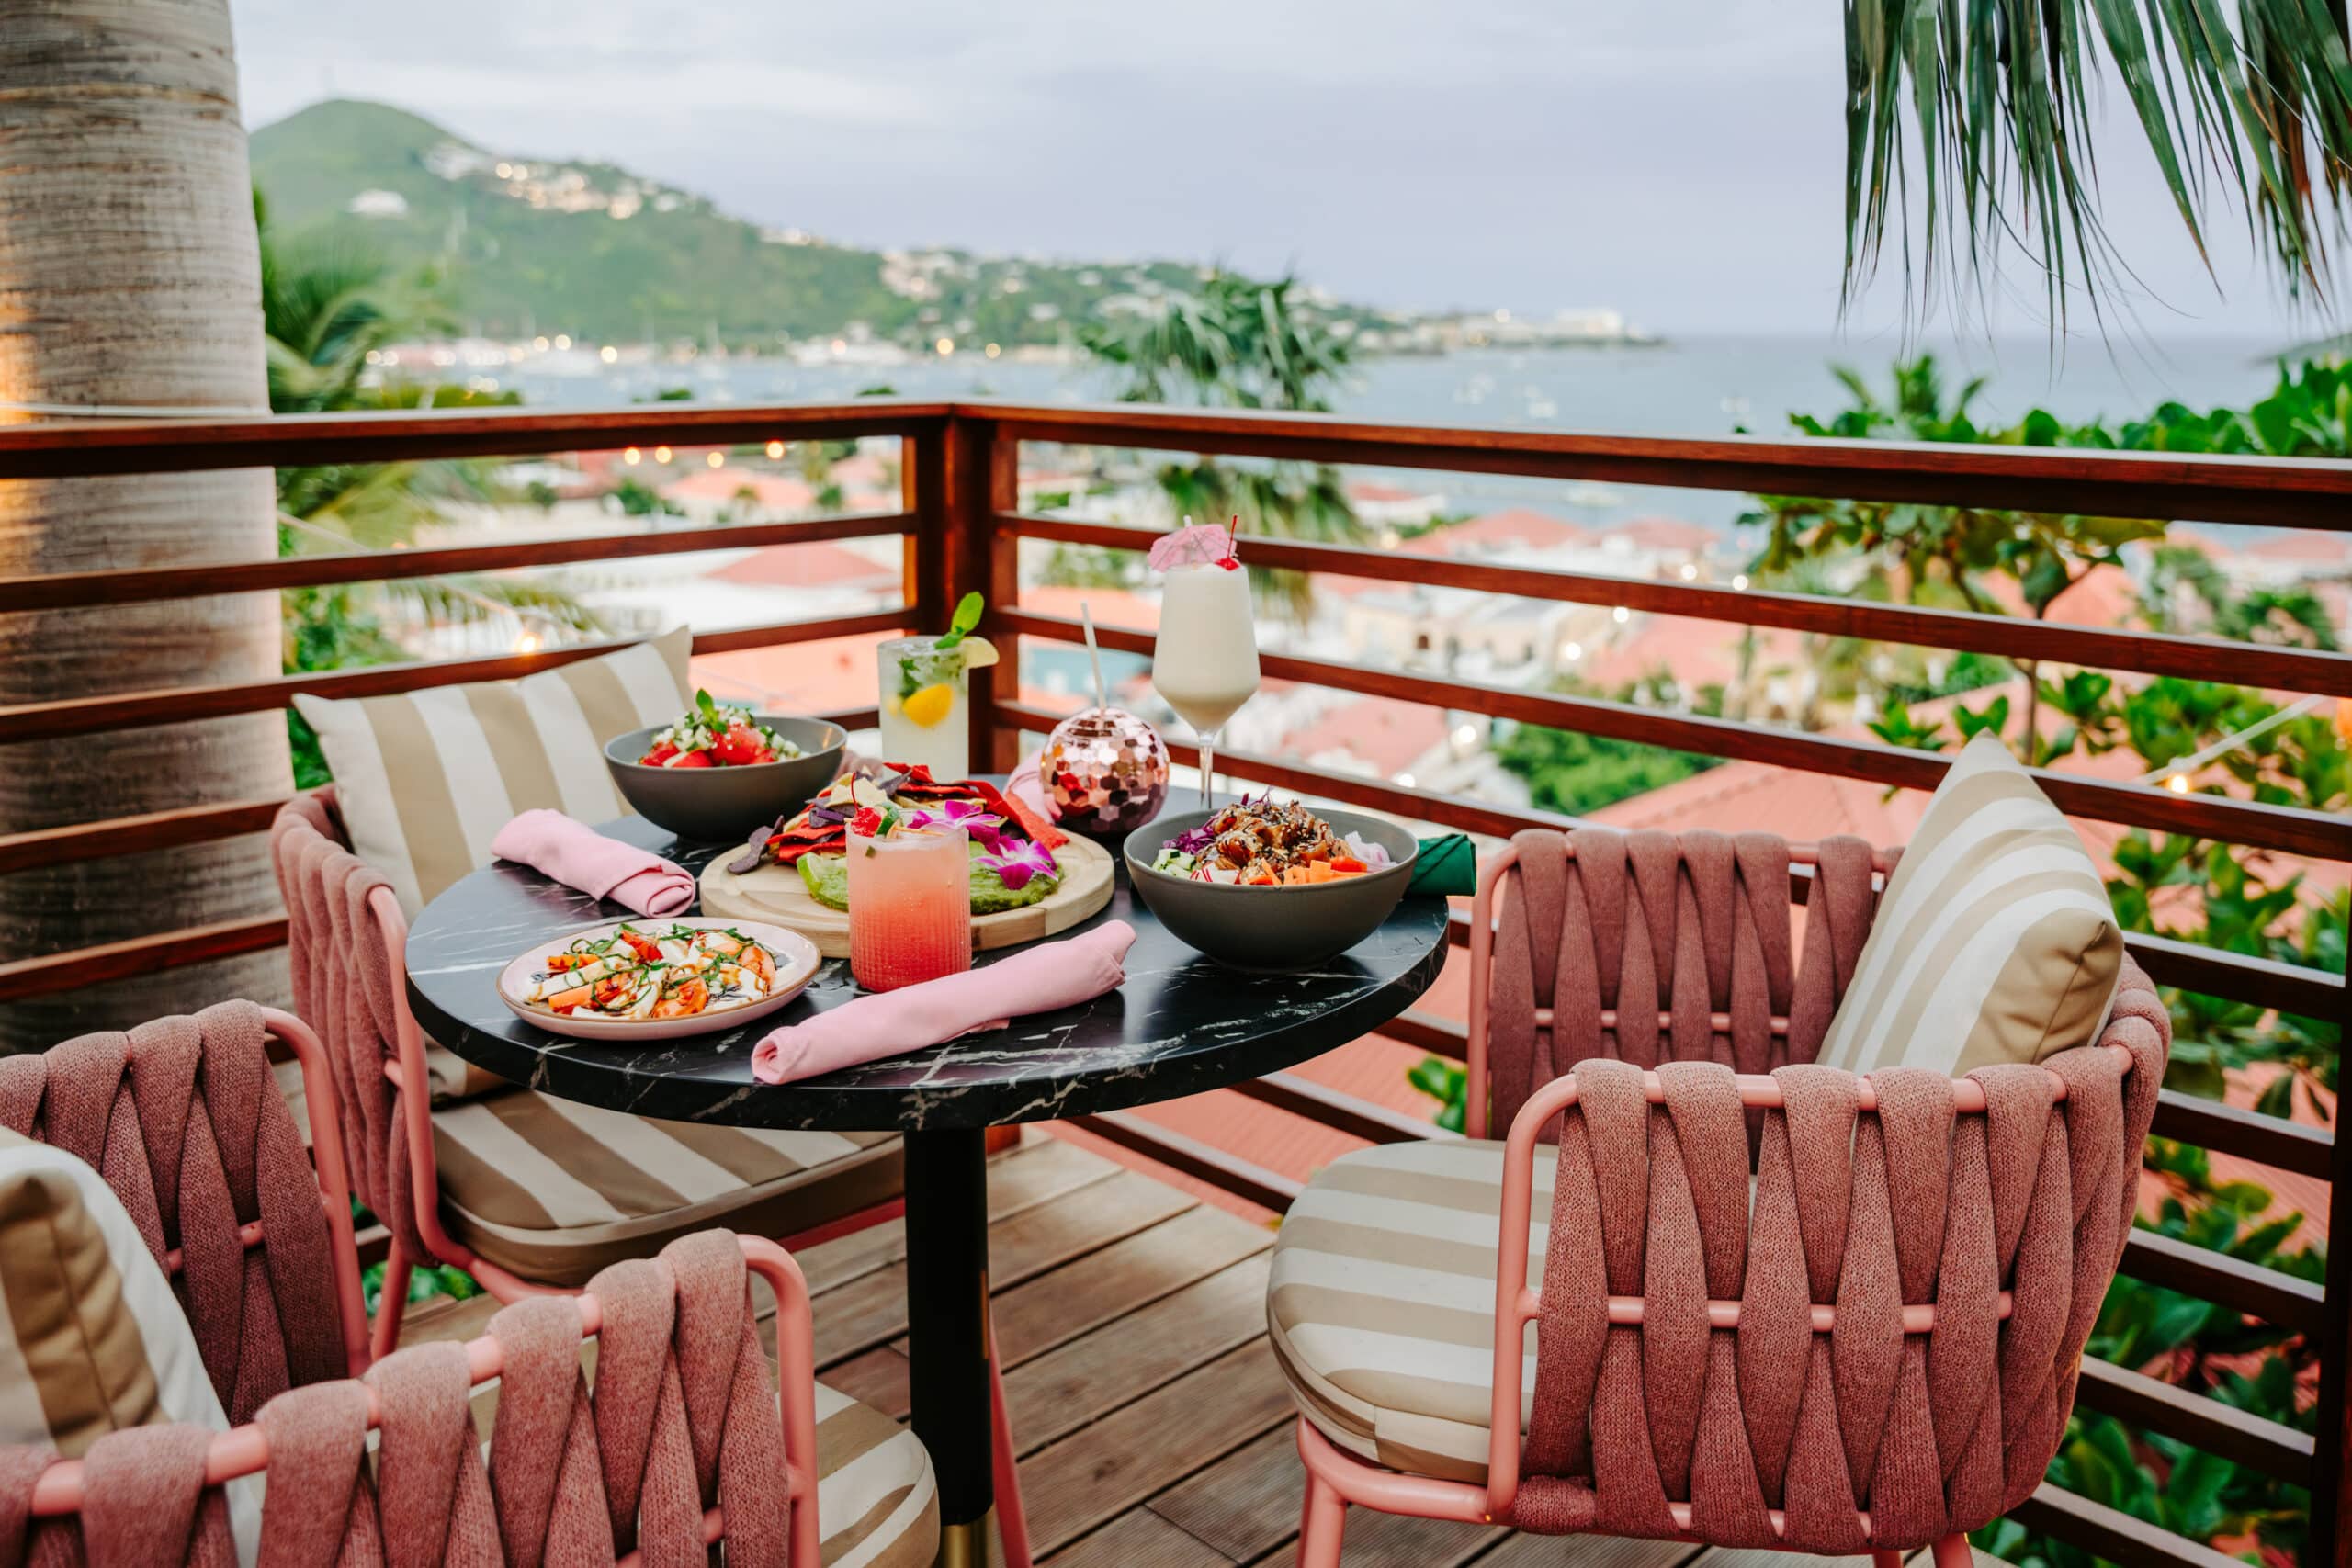 The Pink Palm Hotel - Beautiful view and delicious food on the terrace